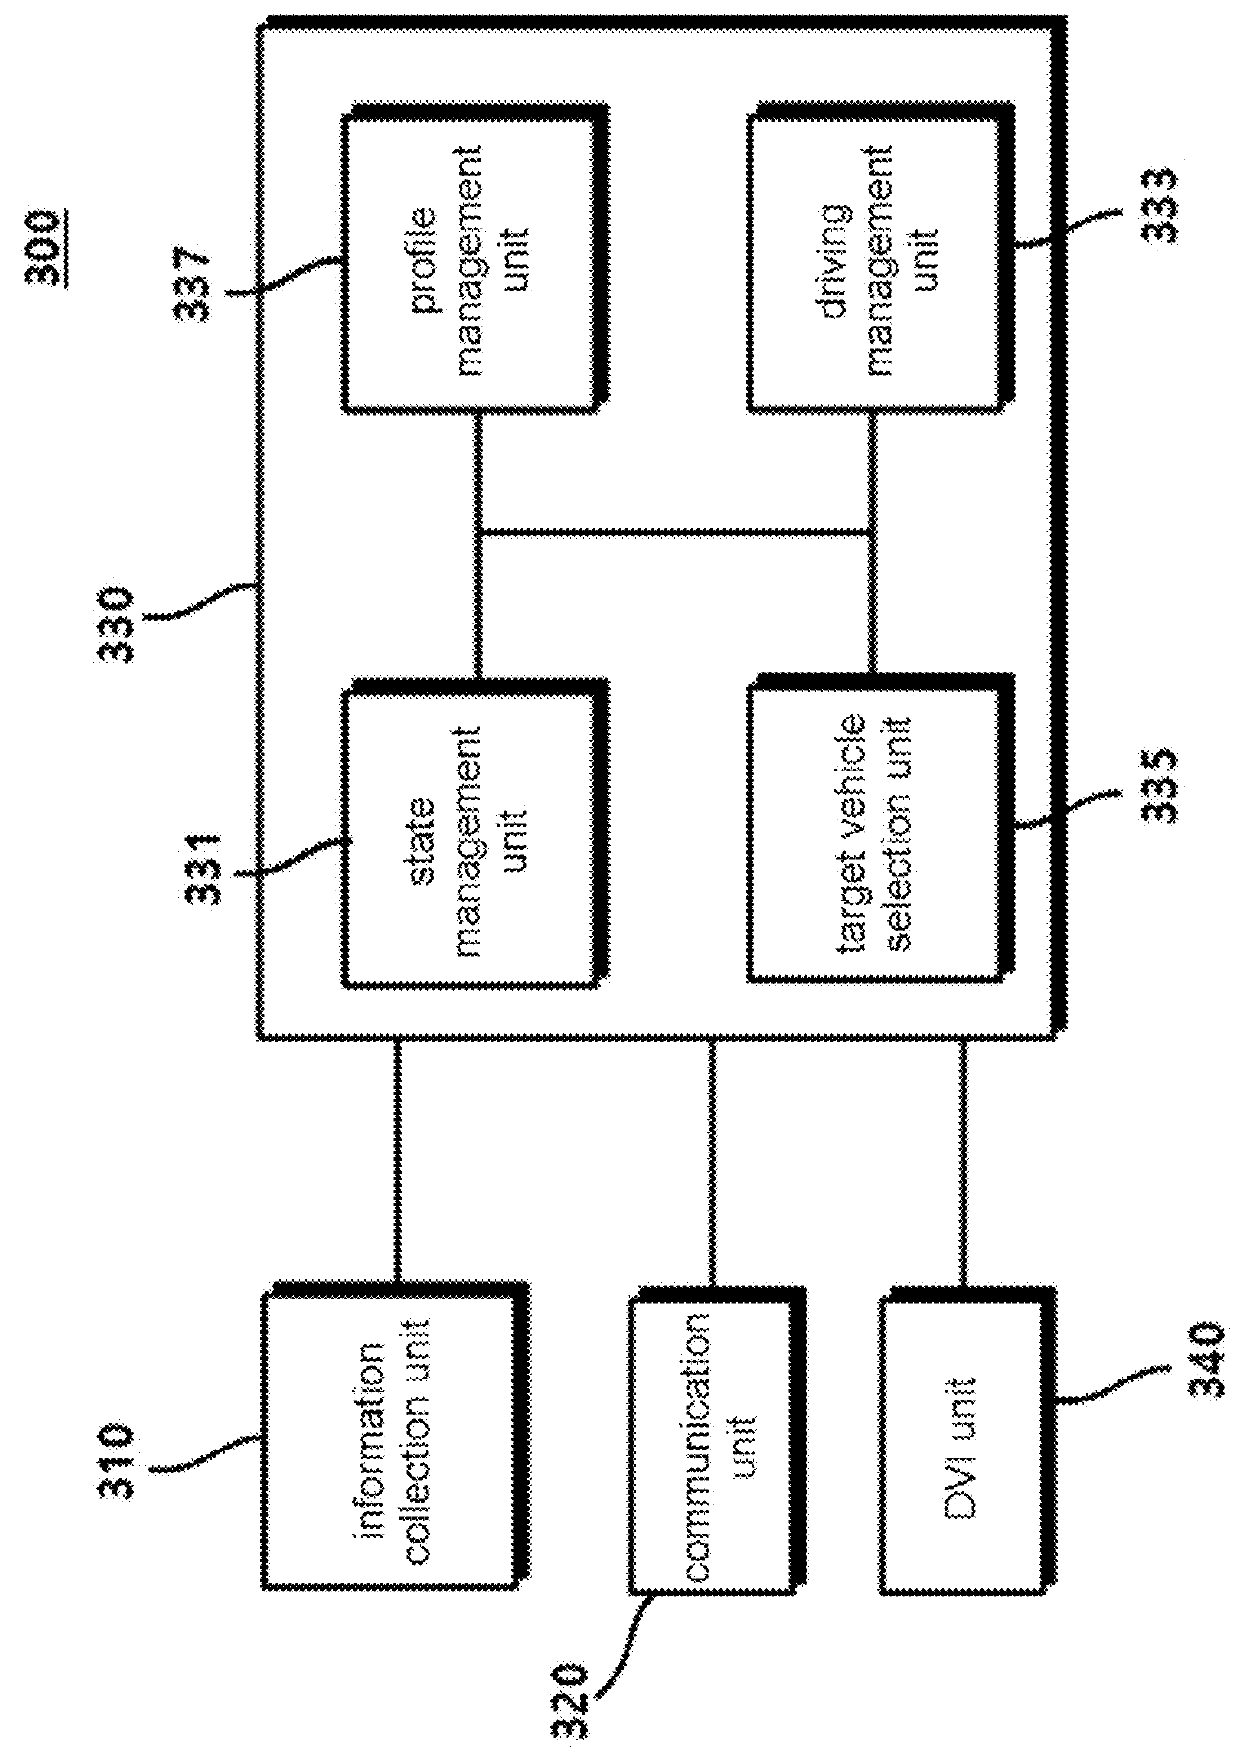 Apparatus and method for controlling speed in cooperative adaptive cruise control system